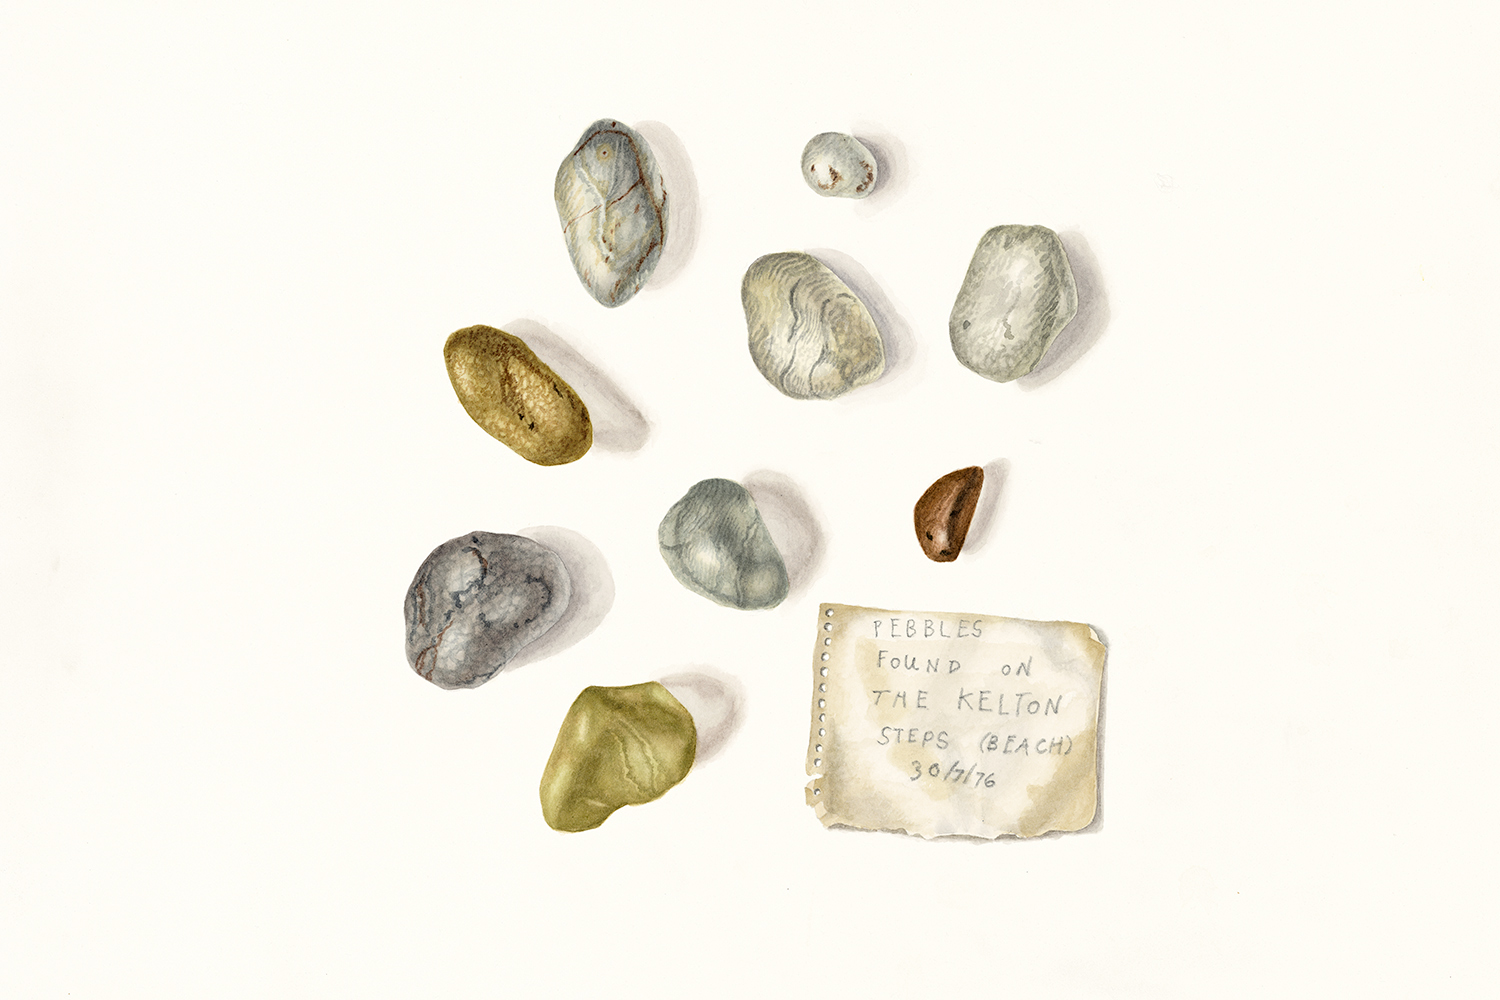 Polishing Stones found in the Big Water of Fleet 29.7.76 (collection of Duncan Matthews), 2010, watercolour on paper